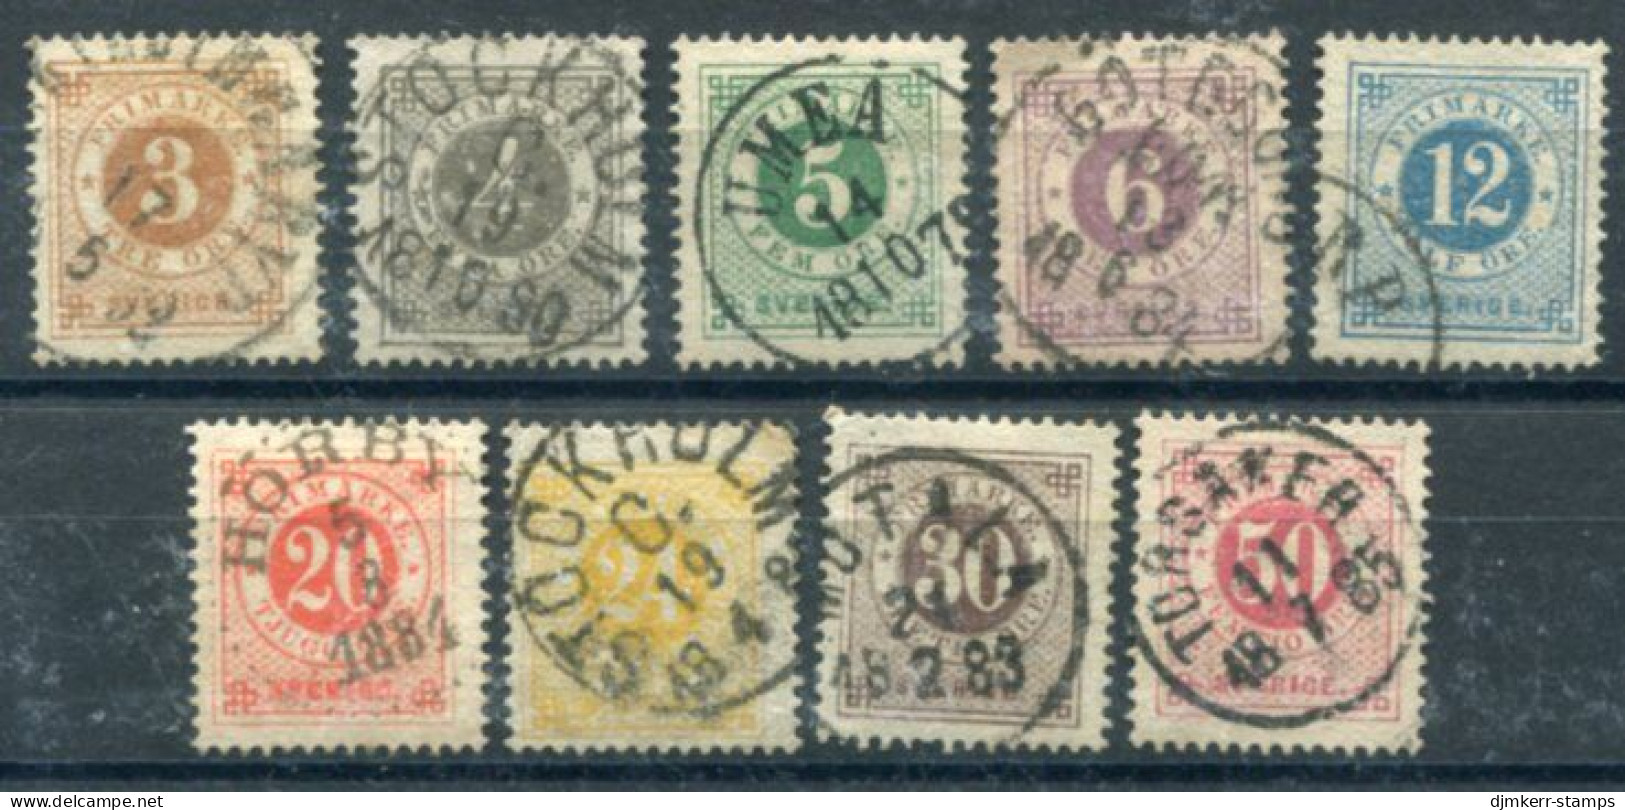 SWEDEN 1877 Definitive Ring Typeset  Perforated 13-13½, Used With Good Centering.   Michel 17B-25B - Used Stamps